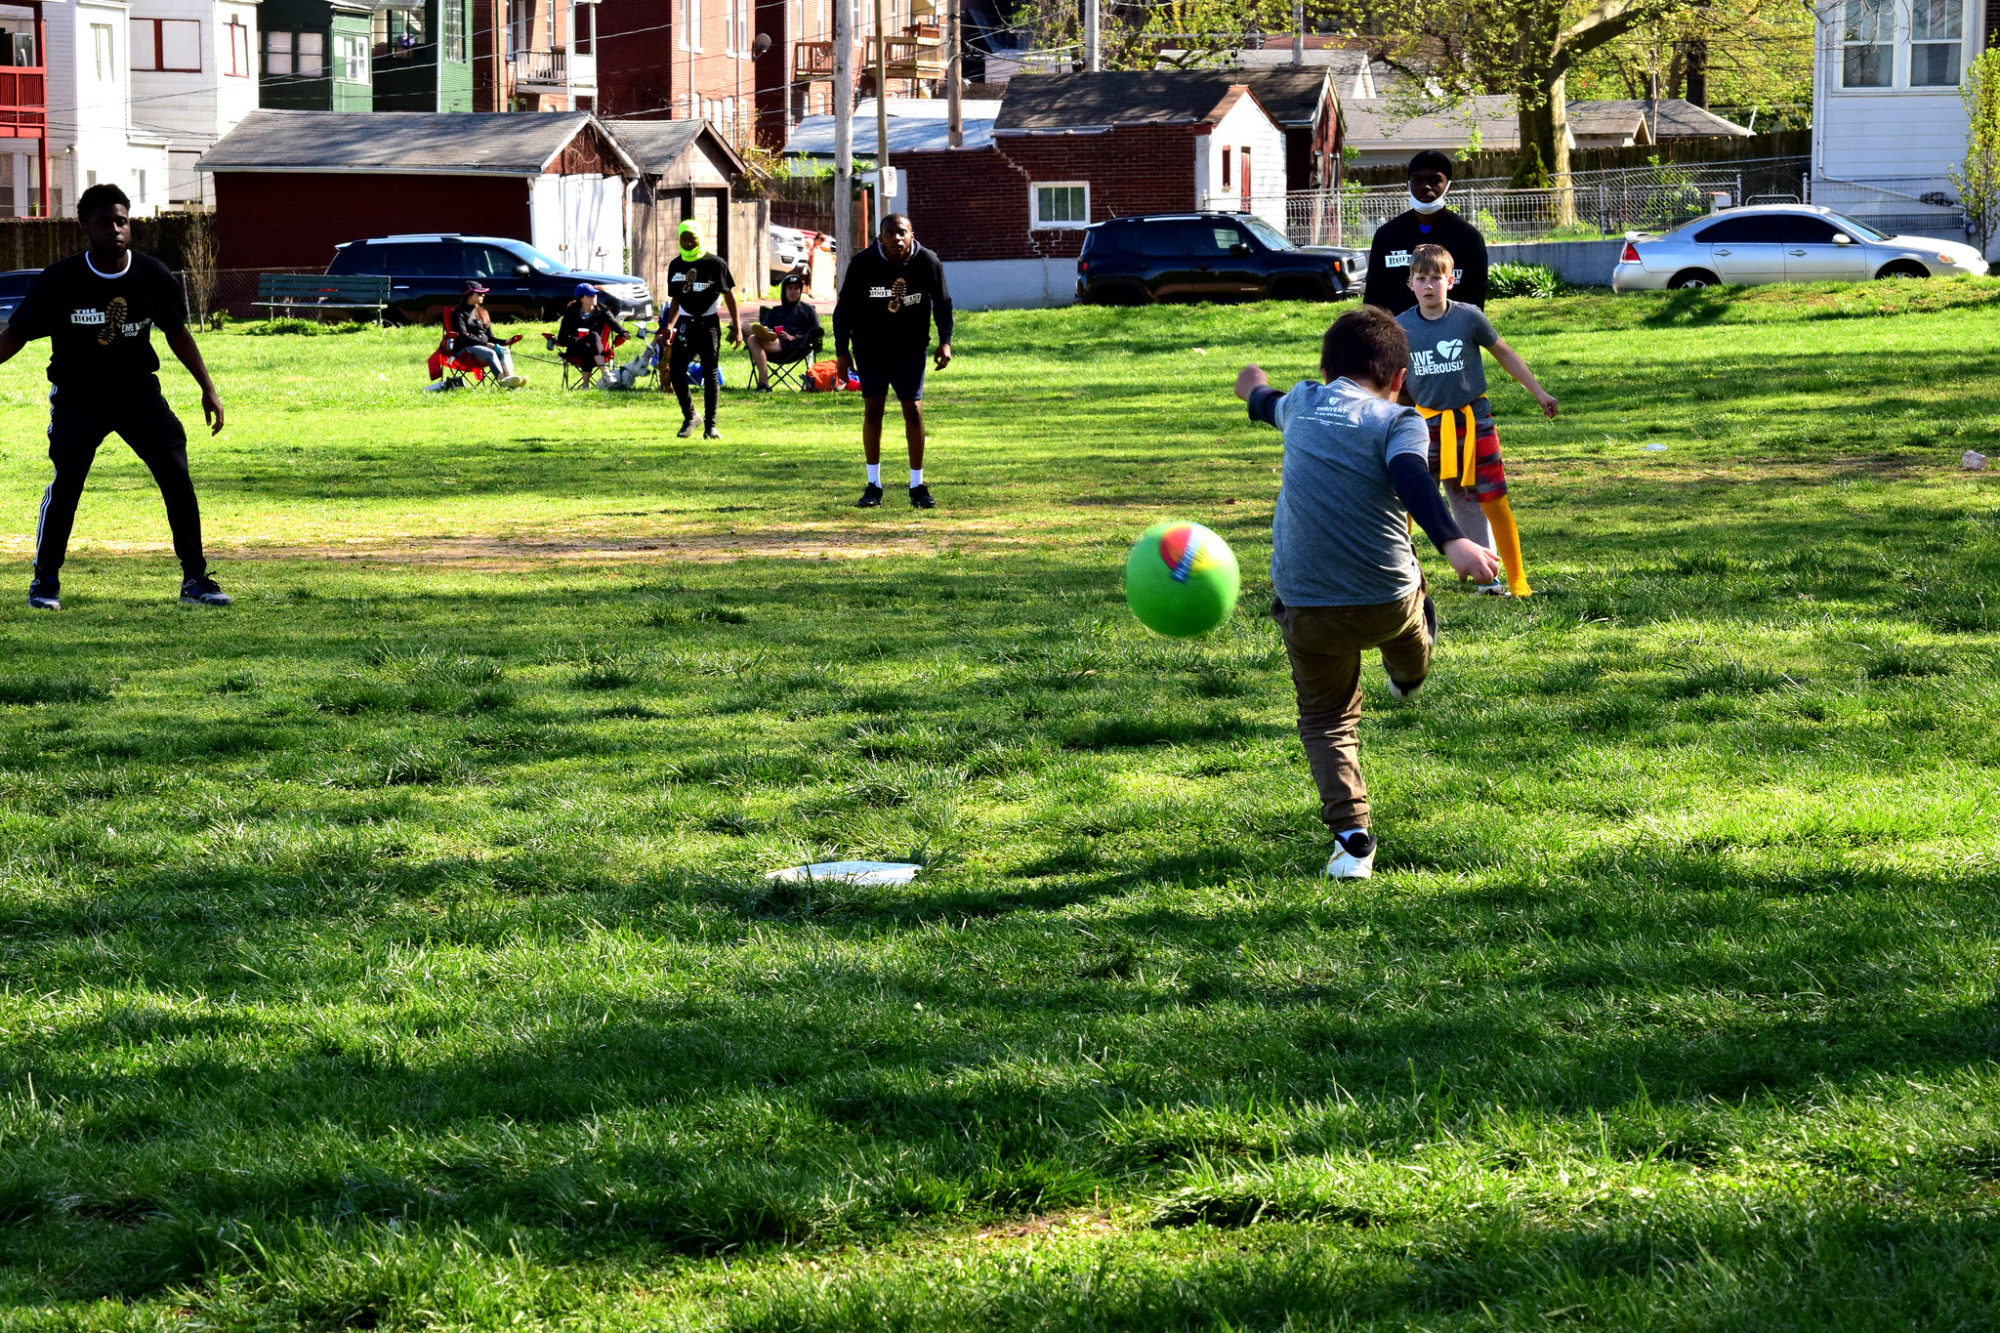 Playing kickball at Marquette Park in Dutchtown, St. Louis, MO.